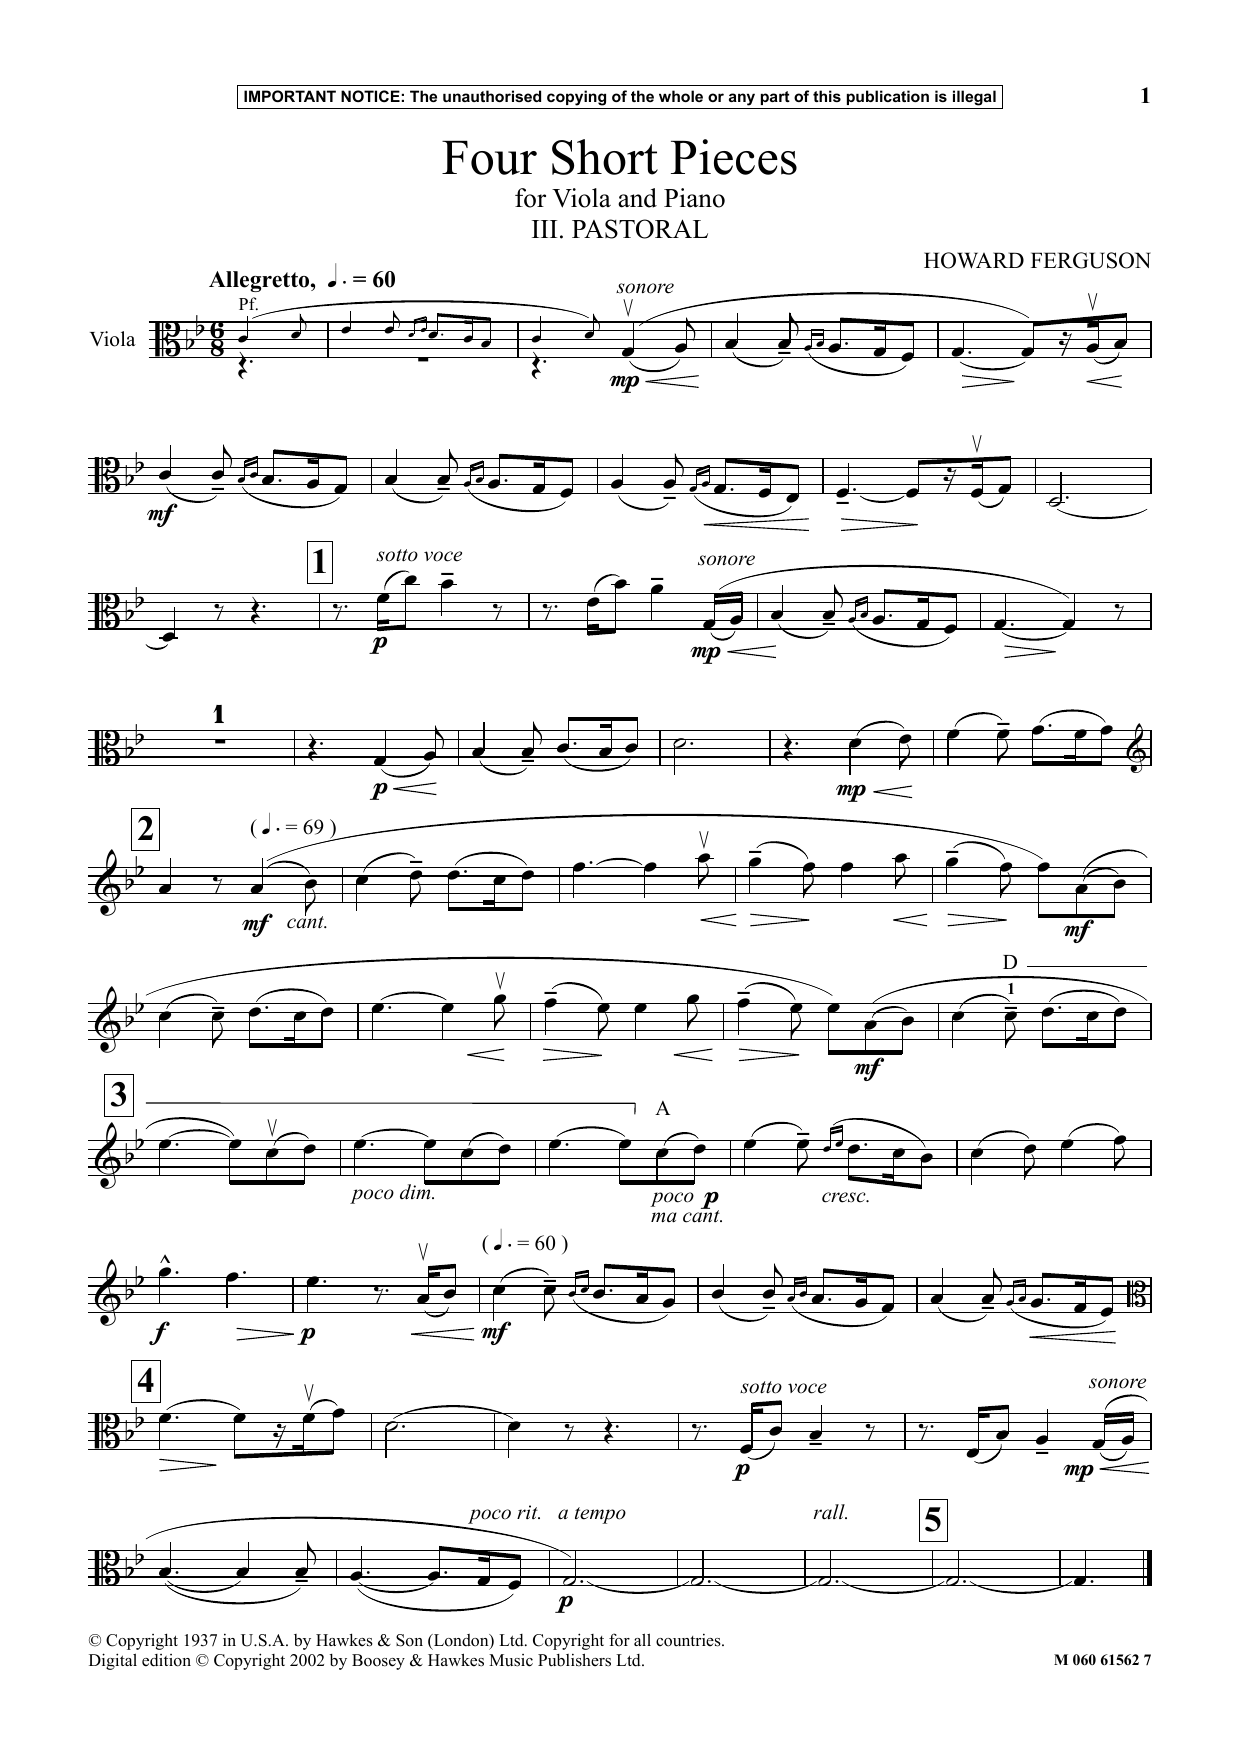 Download Howard Ferguson III. Pastoral (from Four Short Pieces F Sheet Music